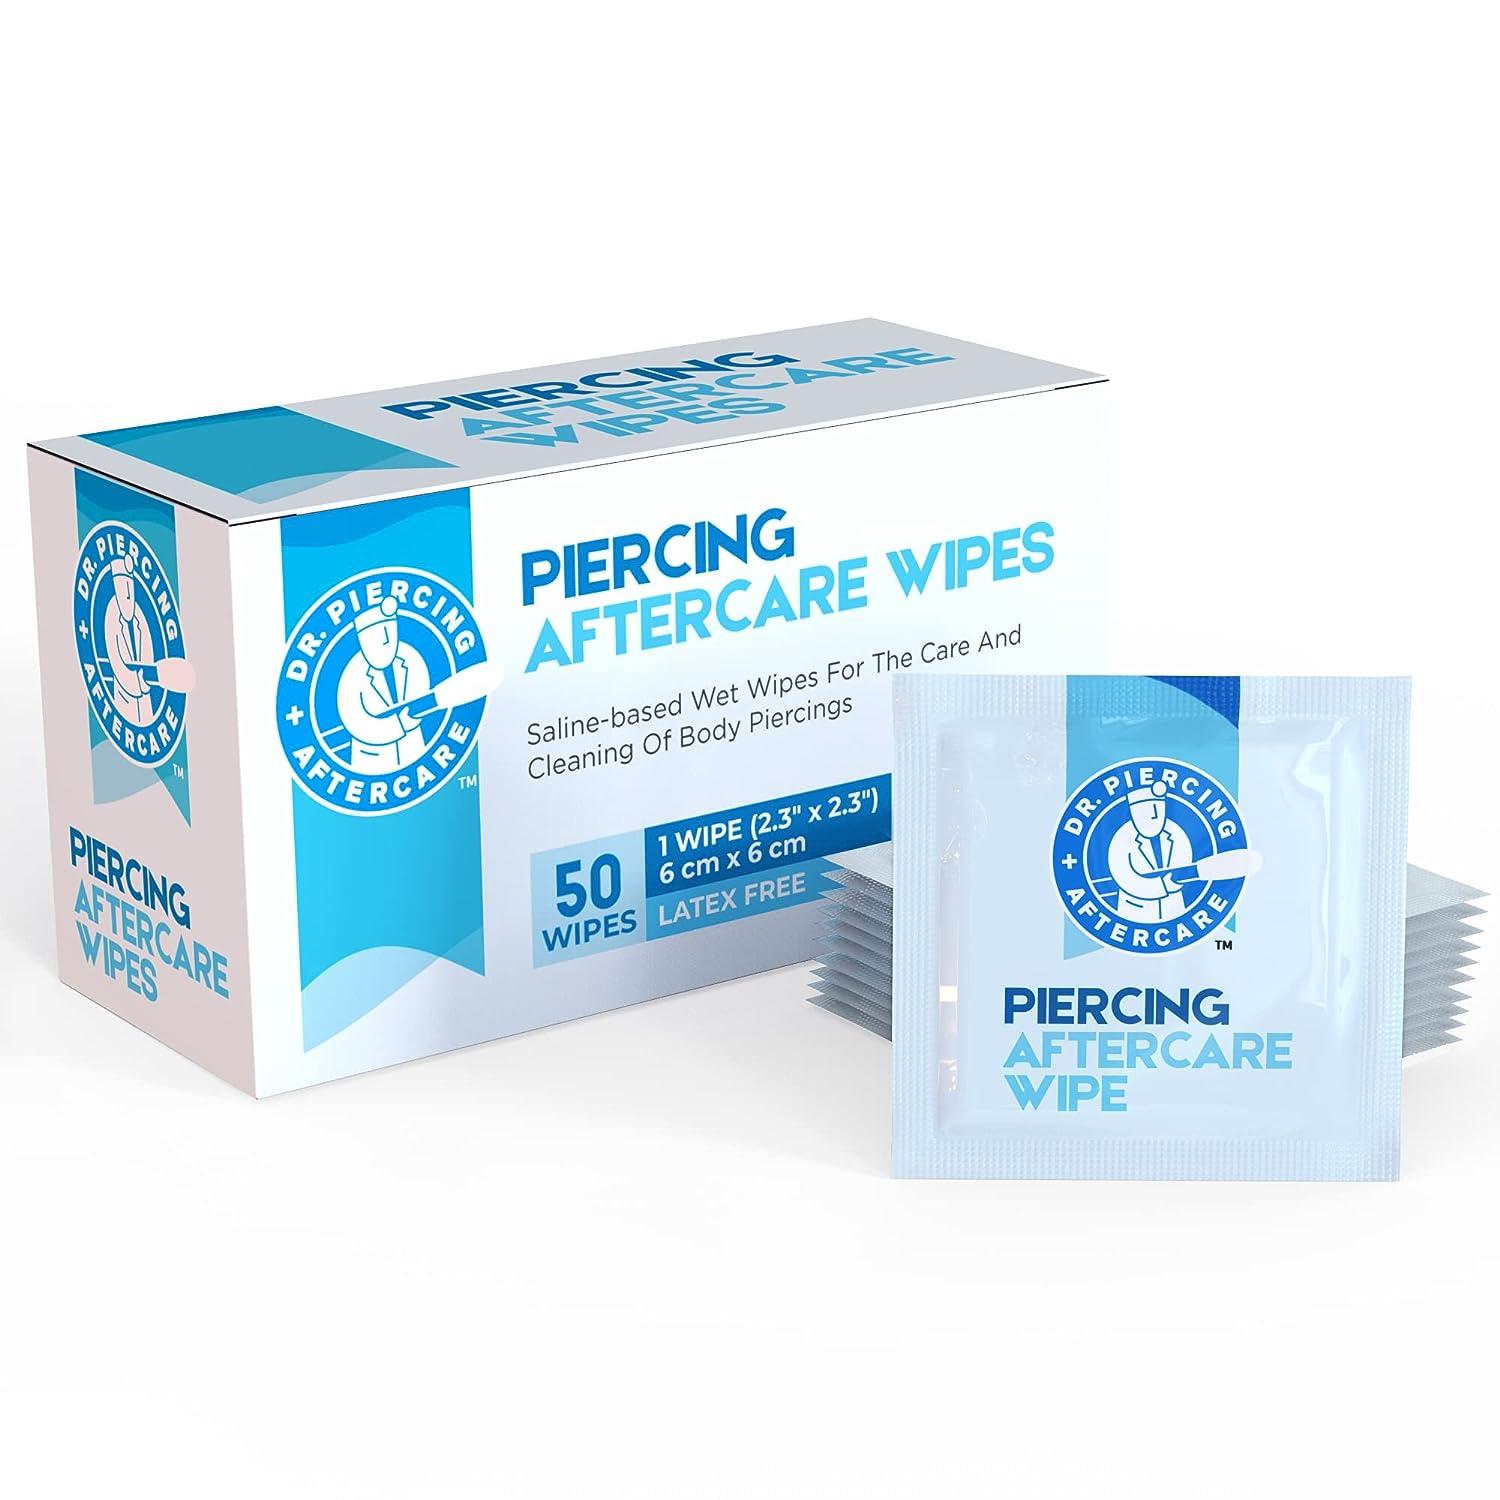 Dr. Piercing Aftercare Wipes - Gentle Wound Wash Saline Solution